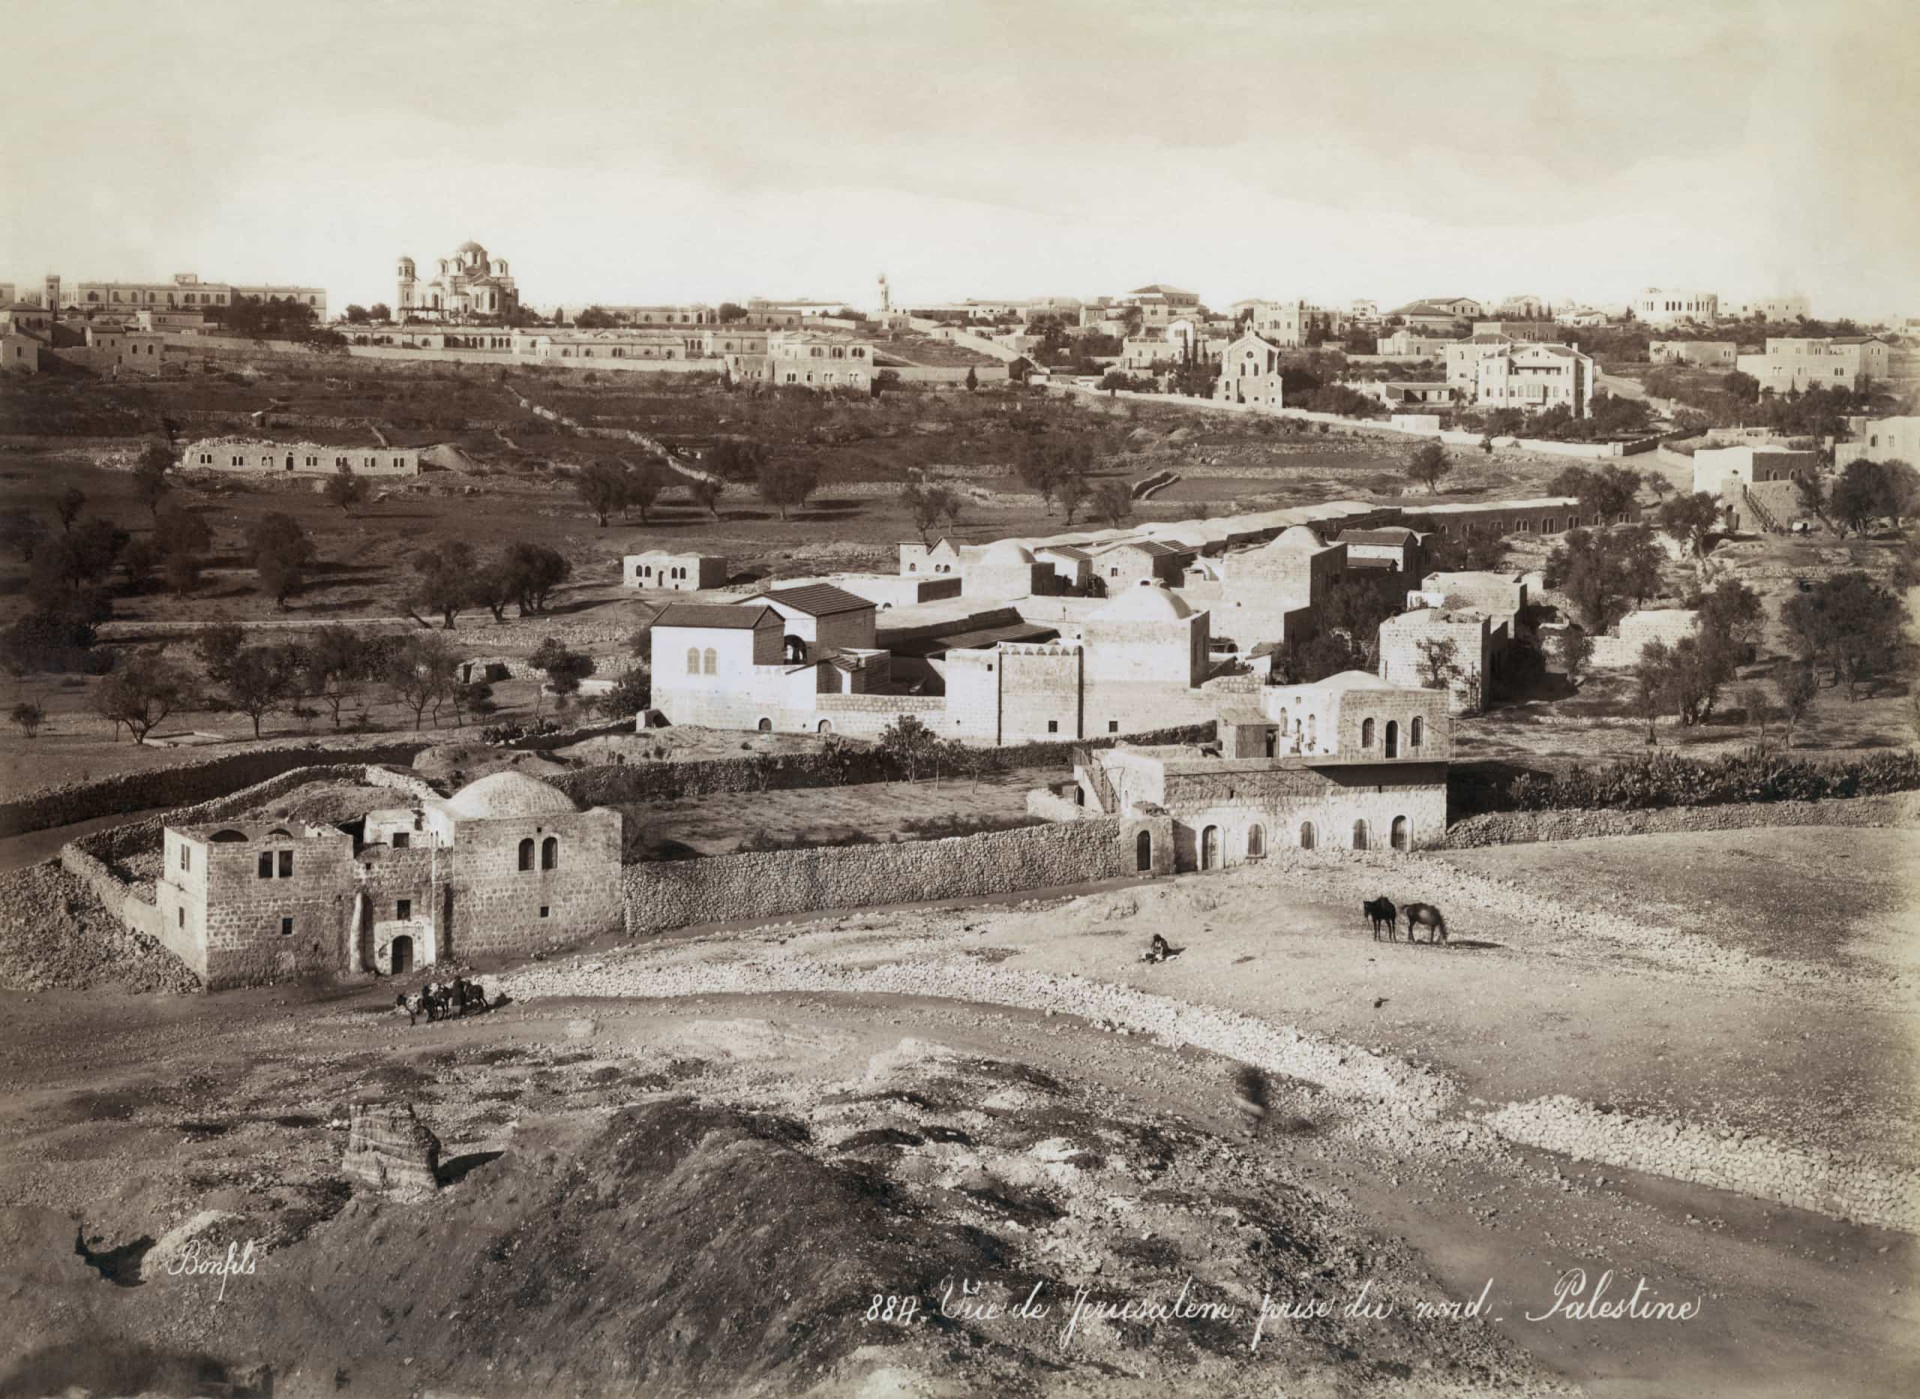 Jerusalem is one of the world's oldest cities, but this snap was taken in 1870, when the city was under Ottoman control. You can spy a Russian church on the left horizon.<p>You may also like:<a href="https://www.starsinsider.com/n/408495?utm_source=msn.com&utm_medium=display&utm_campaign=referral_description&utm_content=397441v1en-us"> Fascinating color meanings around the world</a></p>